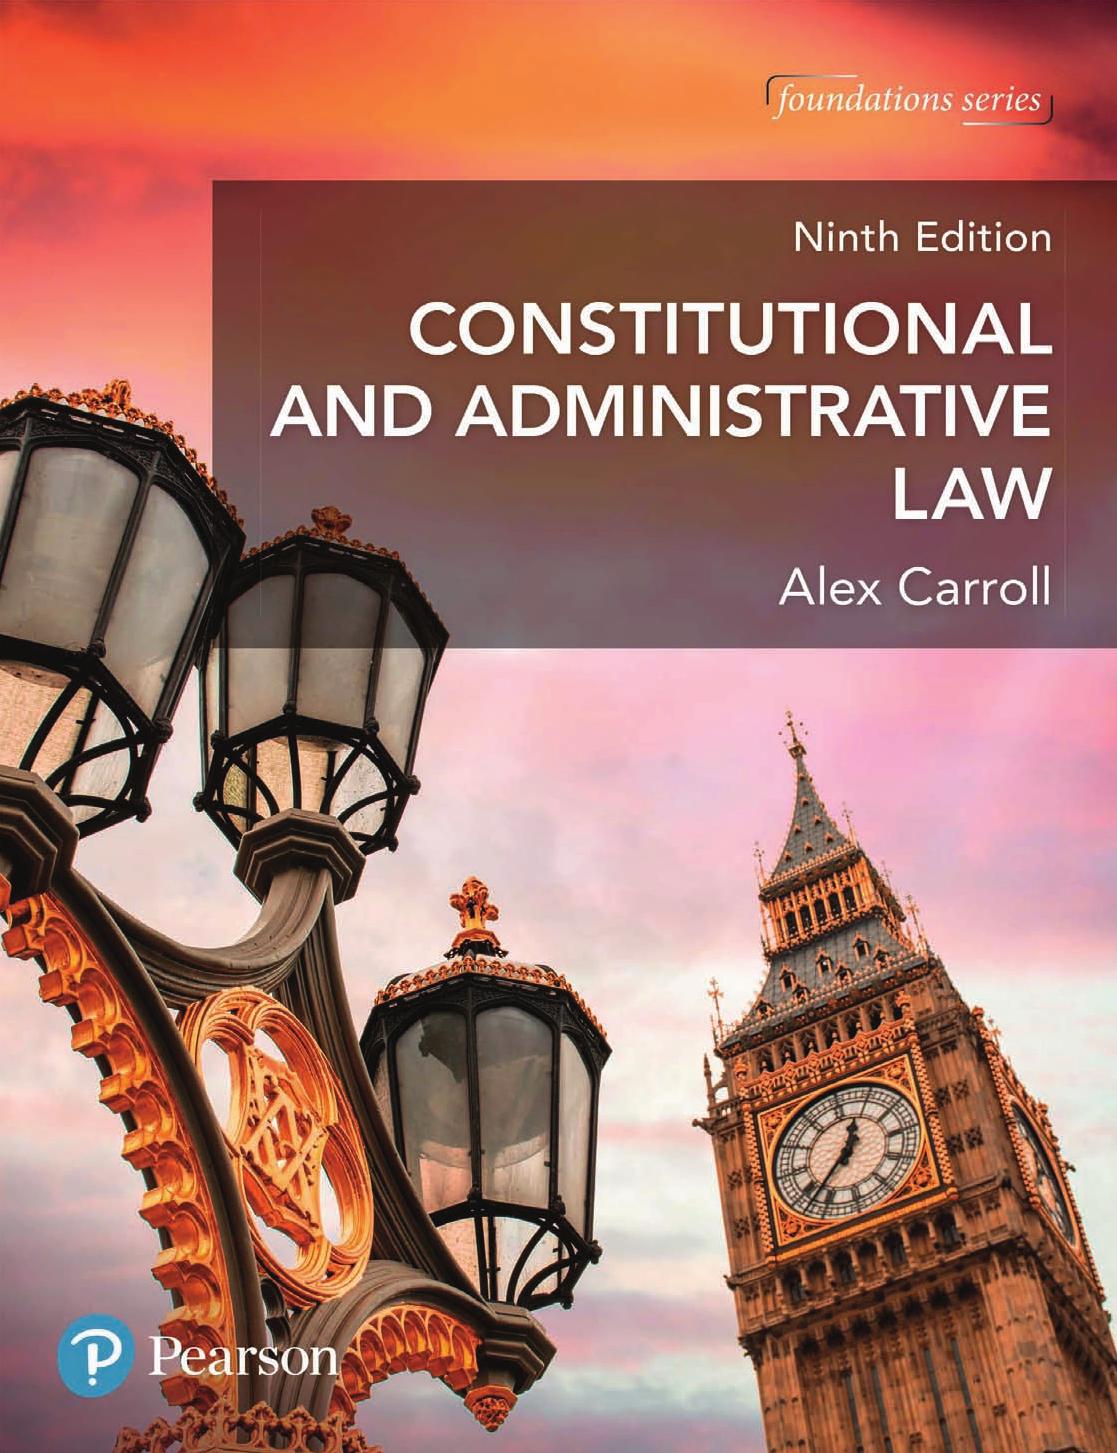 Constitutional and Administrative Law, 9e